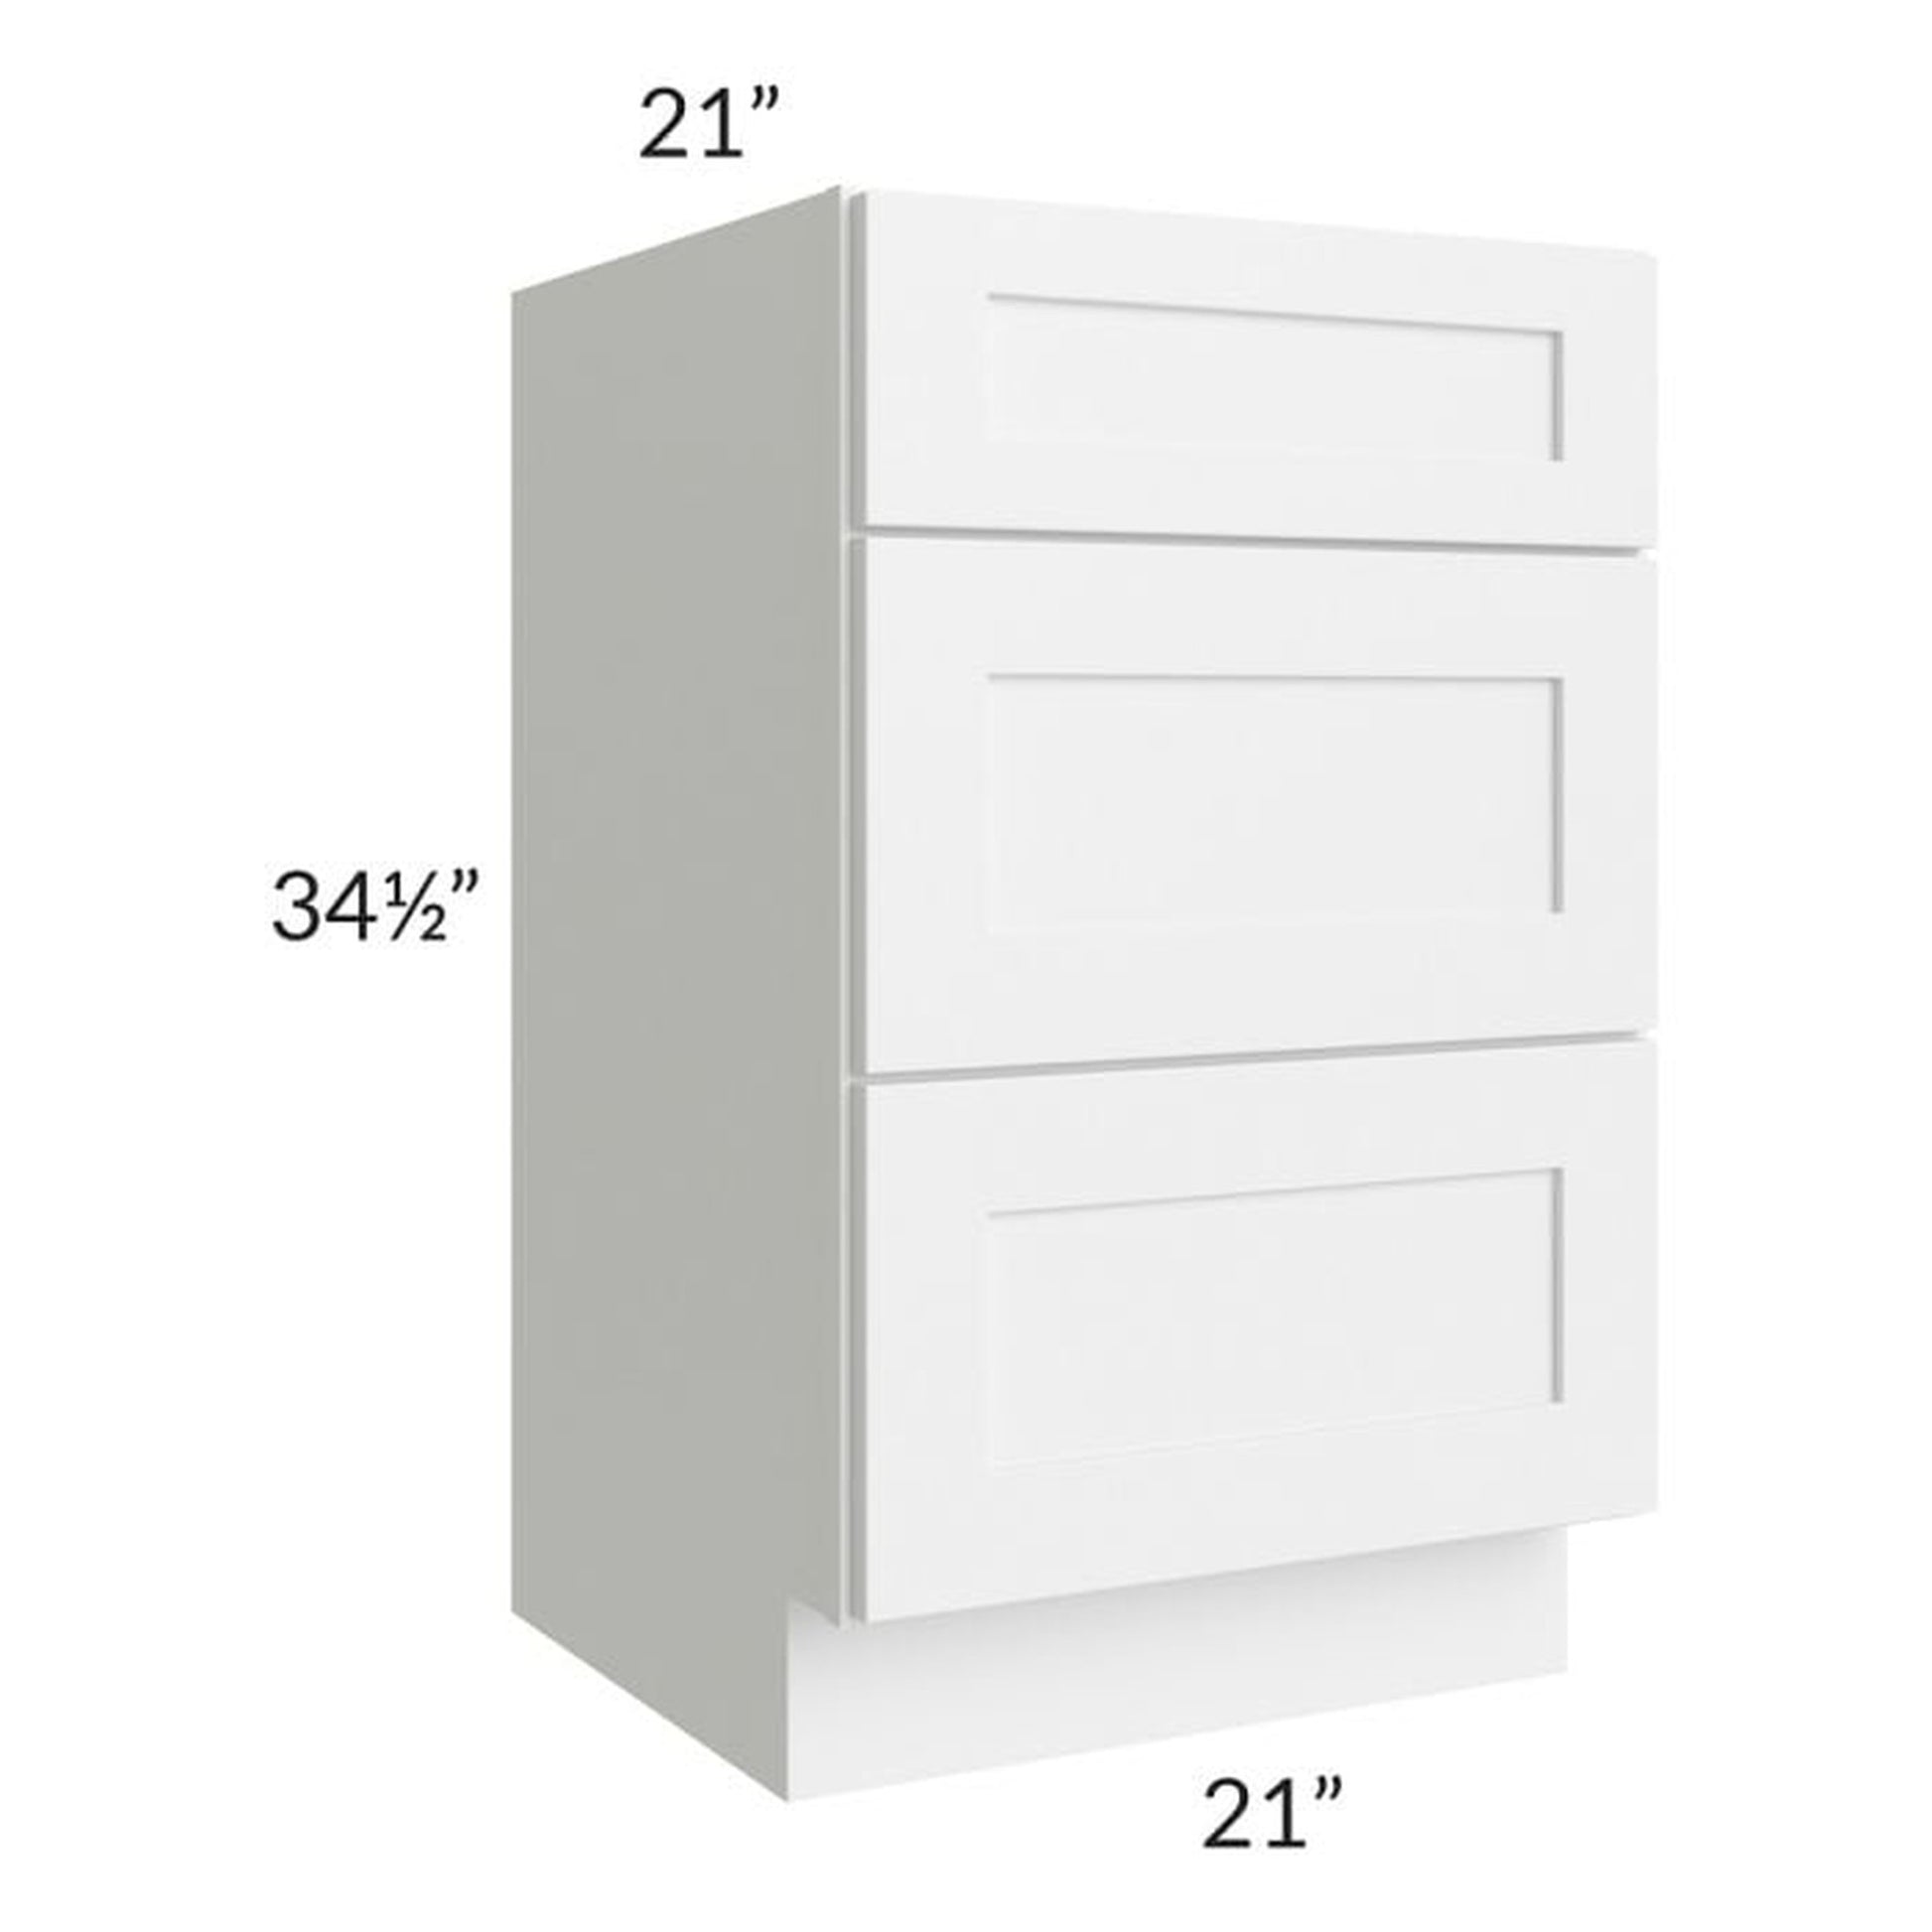 RTA Frosted White Shaker 21" Vanity Three Drawer Base Cabinet with 2 Decorative End Panels